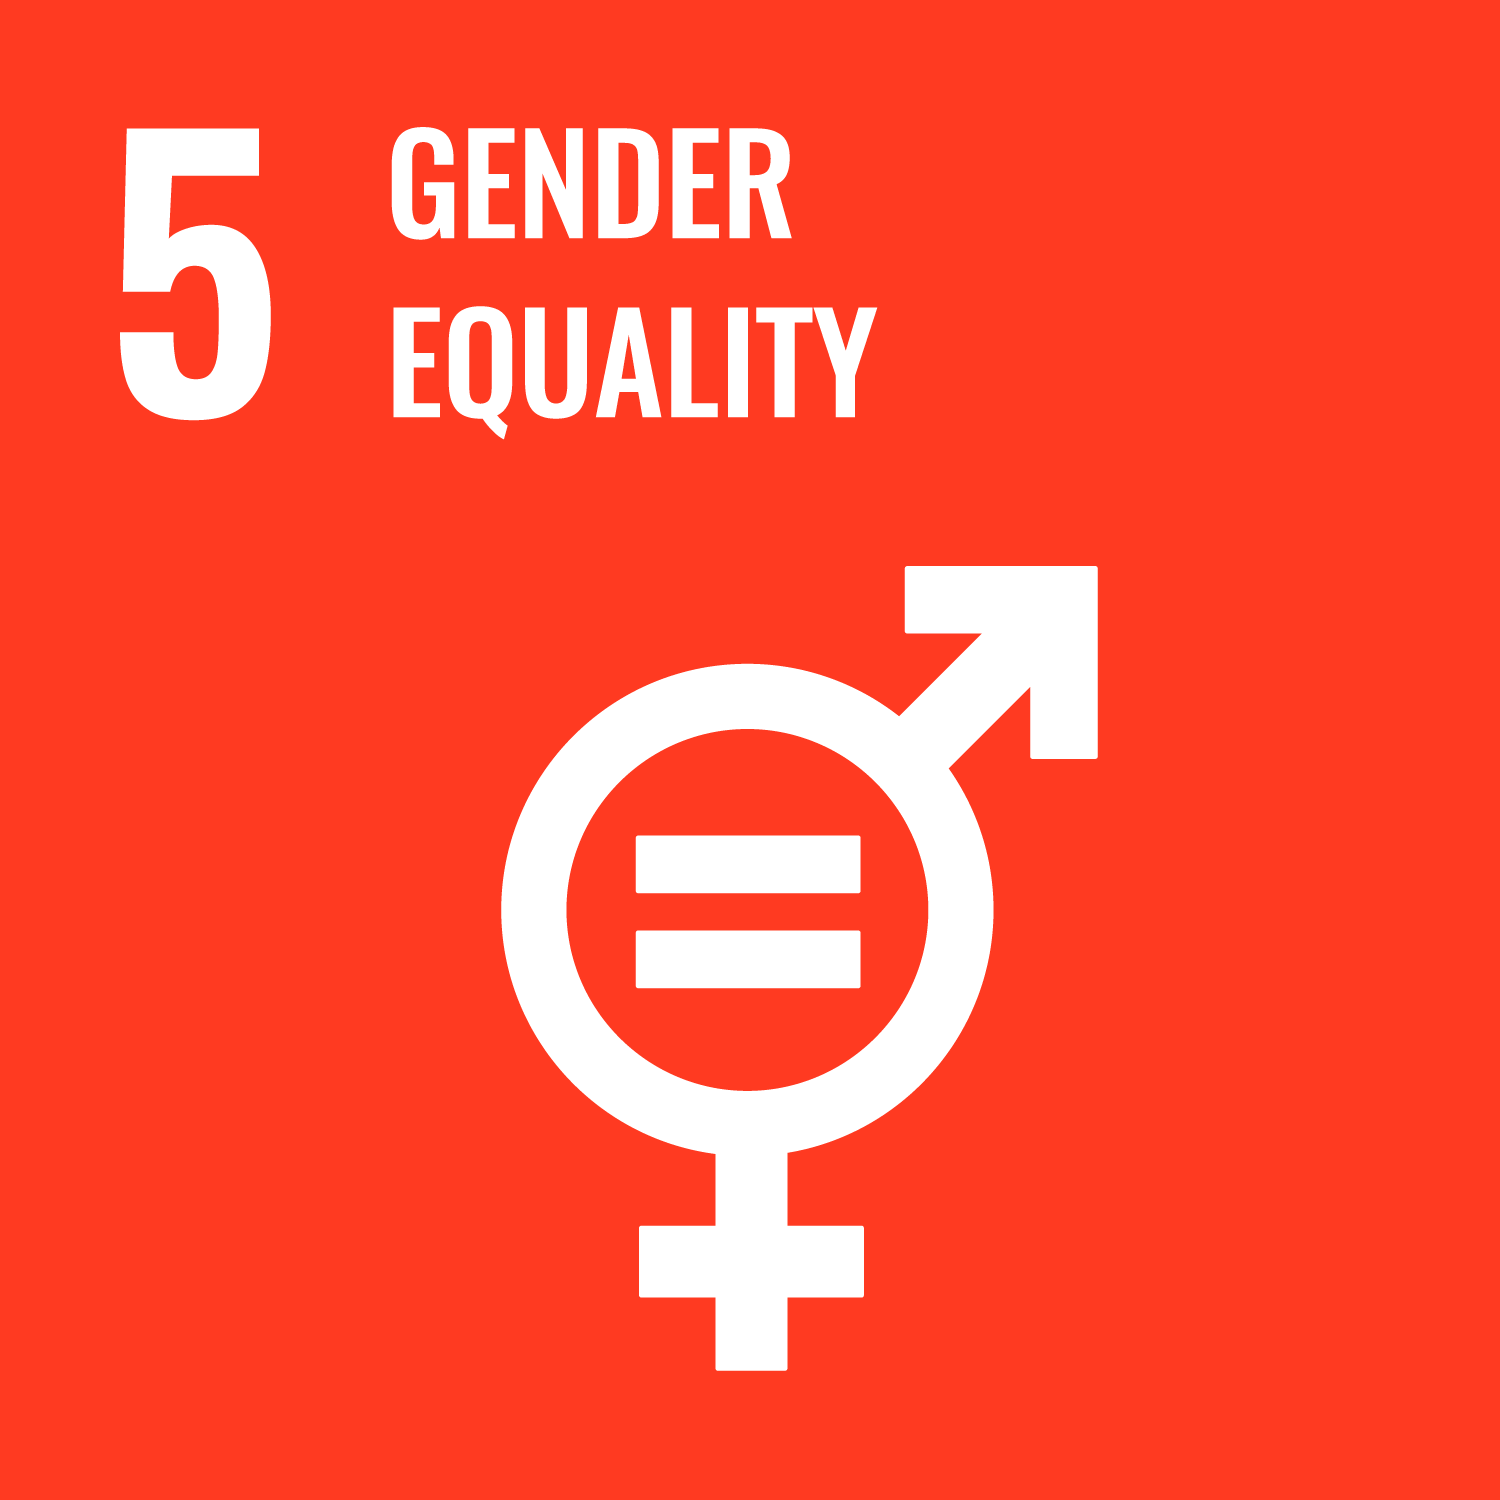 United Nations Sustainable Development Goal Number 5: Gender Equality